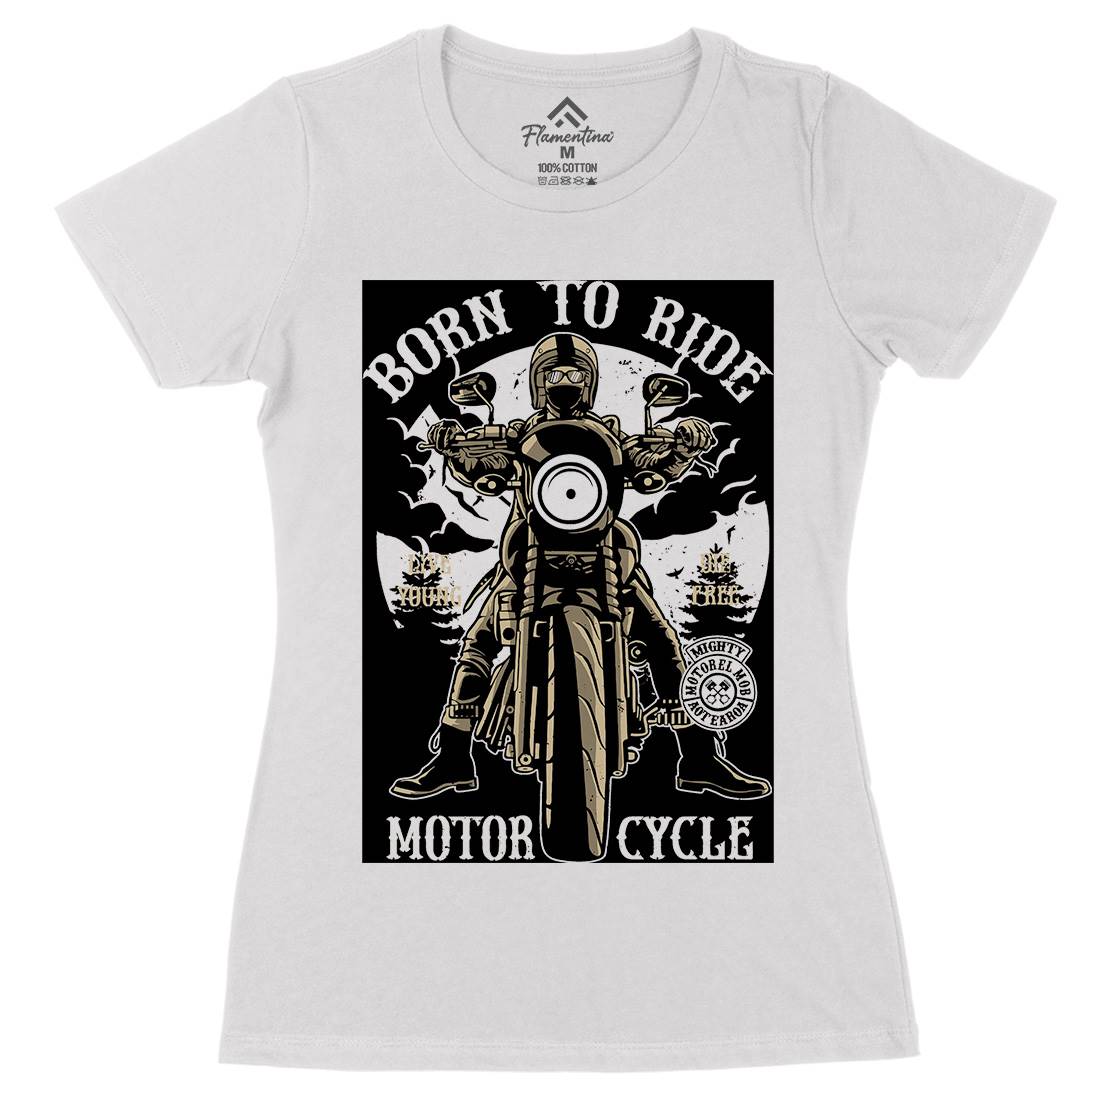 Born To Ride Womens Organic Crew Neck T-Shirt Motorcycles A512